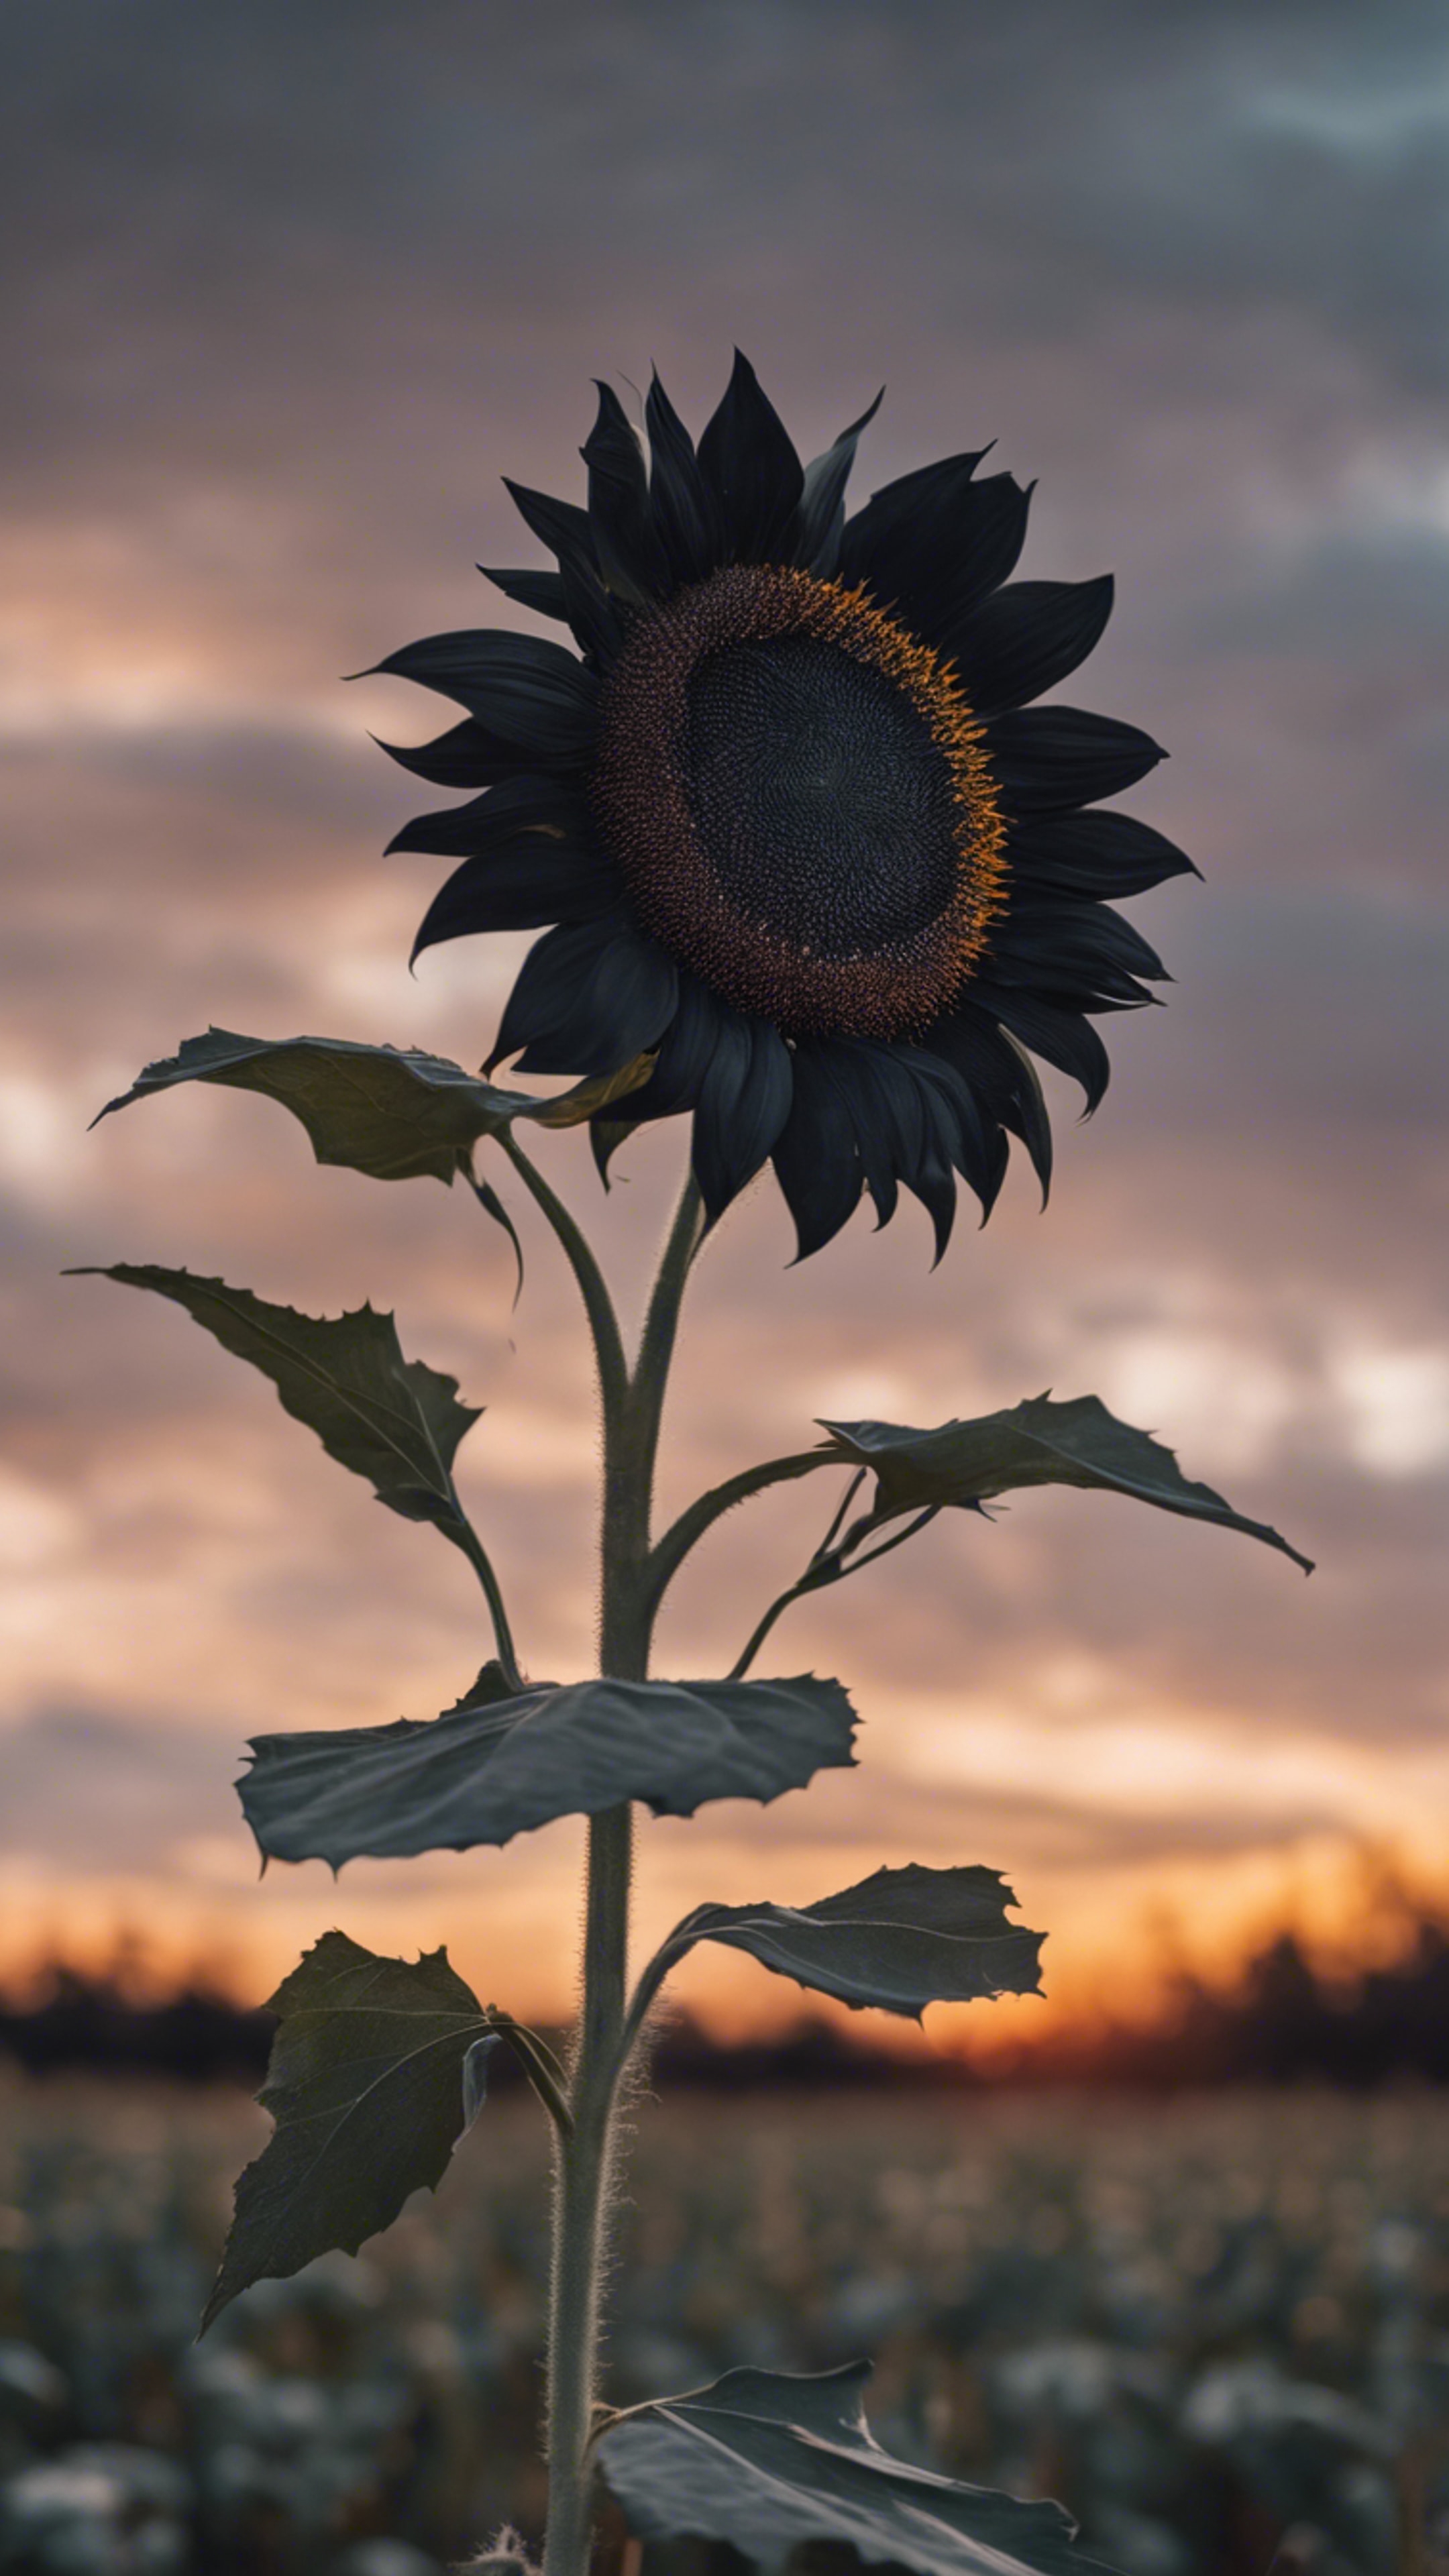 A whimsical black sunflower swaying gently in a breezy fall field under a twilight sky. Wallpaper[07aa79599ea14a61bf4d]